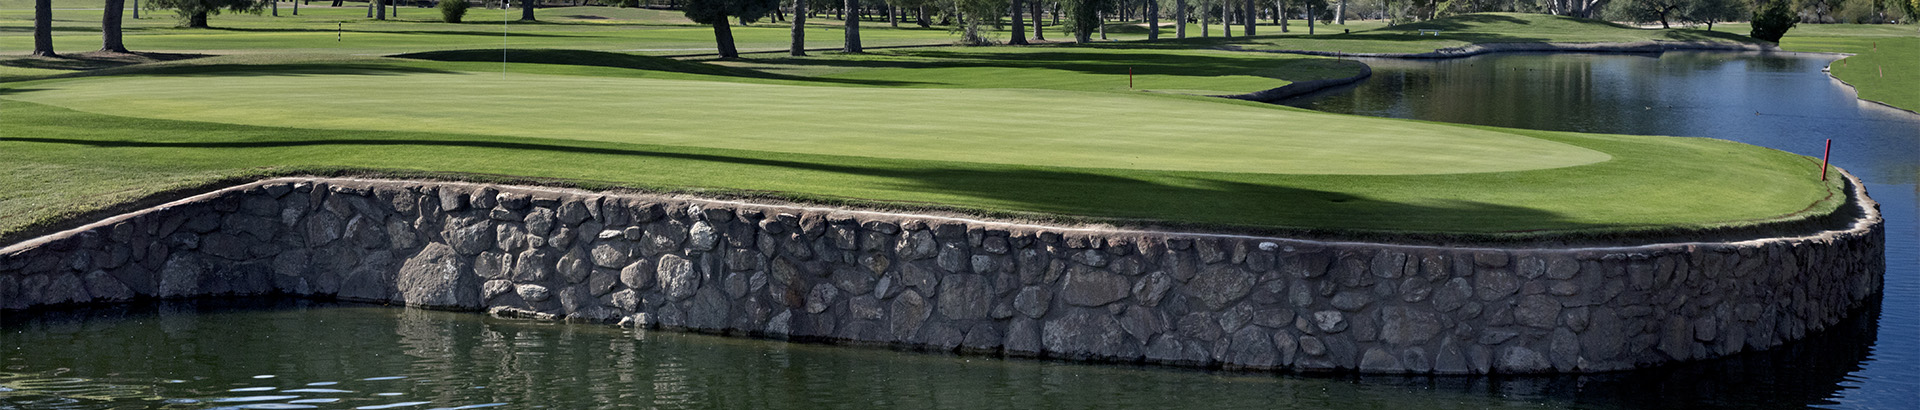 Section of the course with a vertical drop into the lake to the right, a stone wall separating land and water.